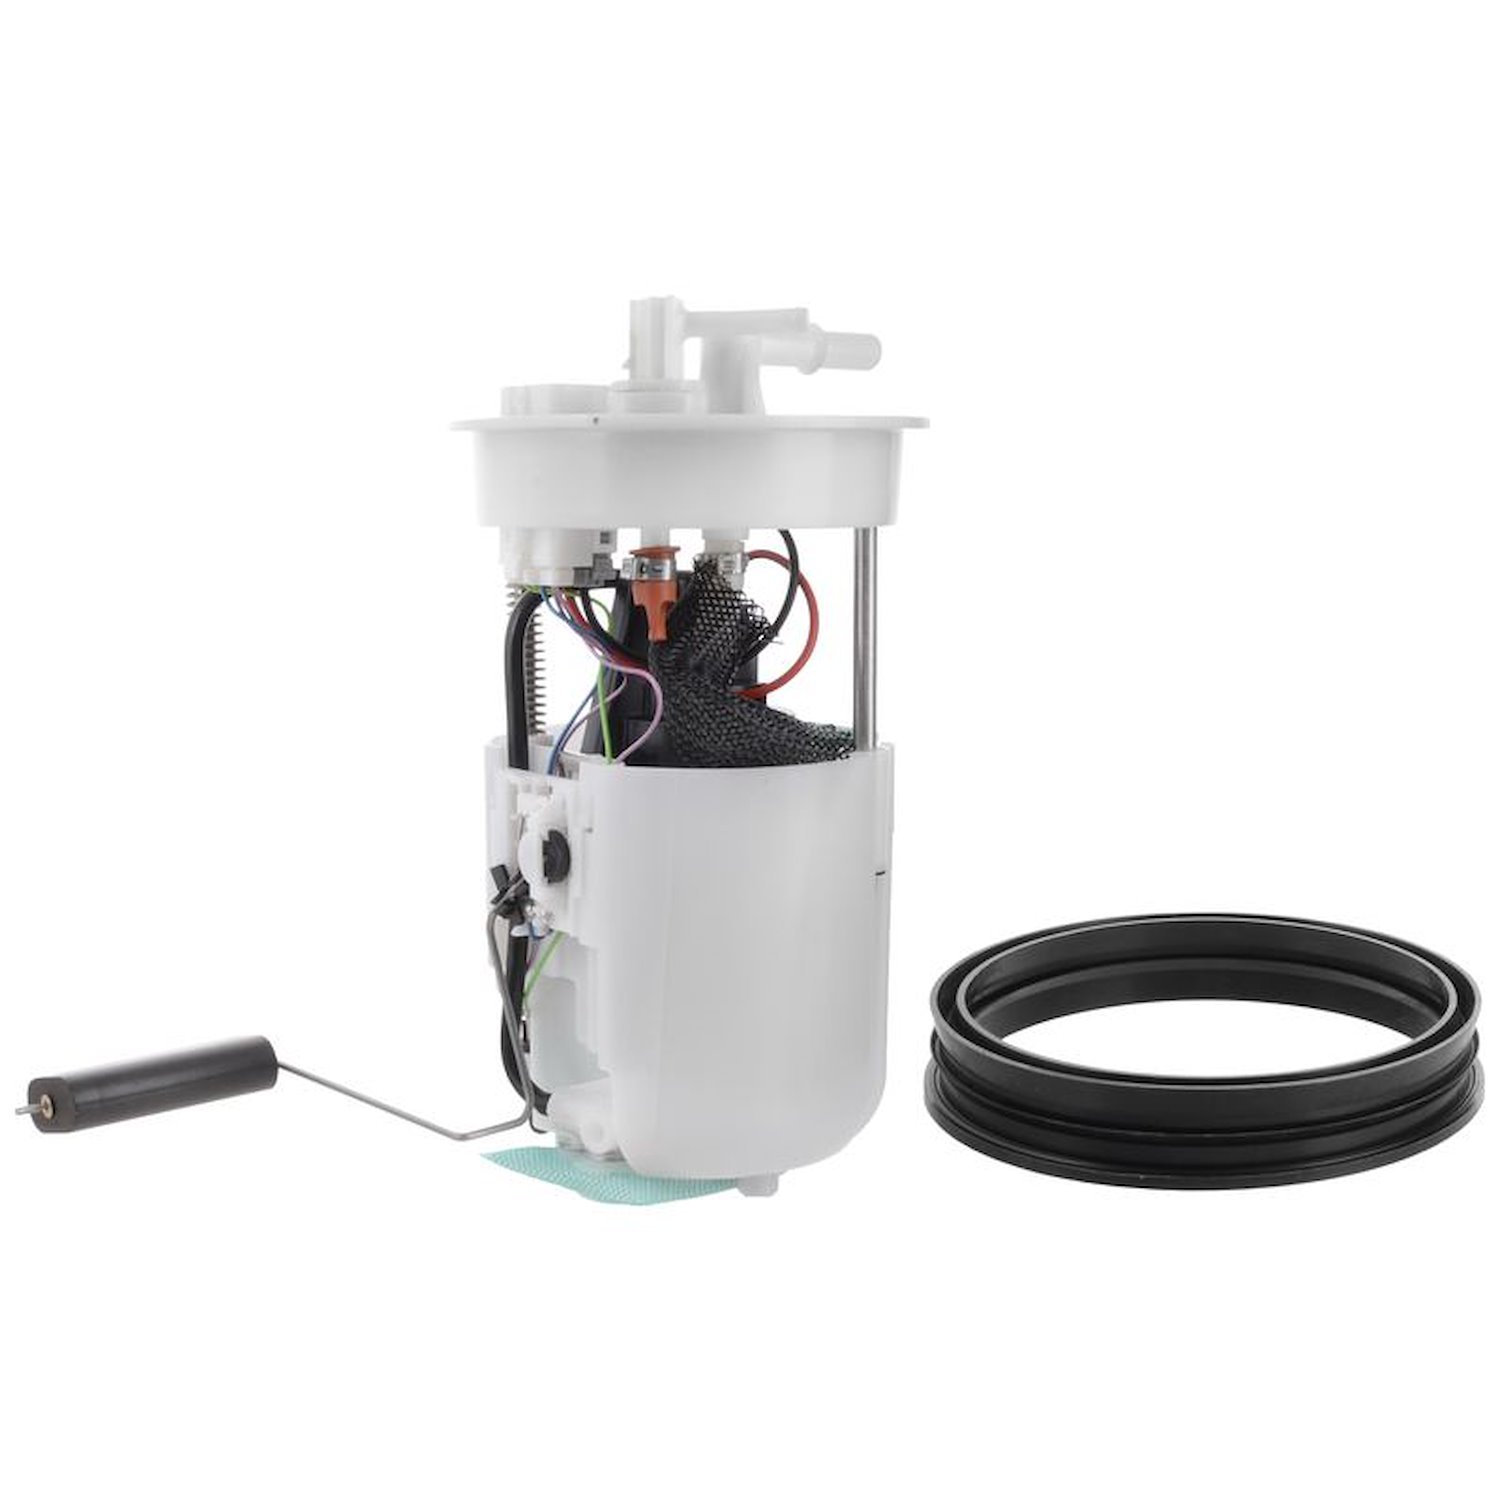 OE Chrysler/Dodge/Jeep Replacement Fuel Pump Module Assembly for